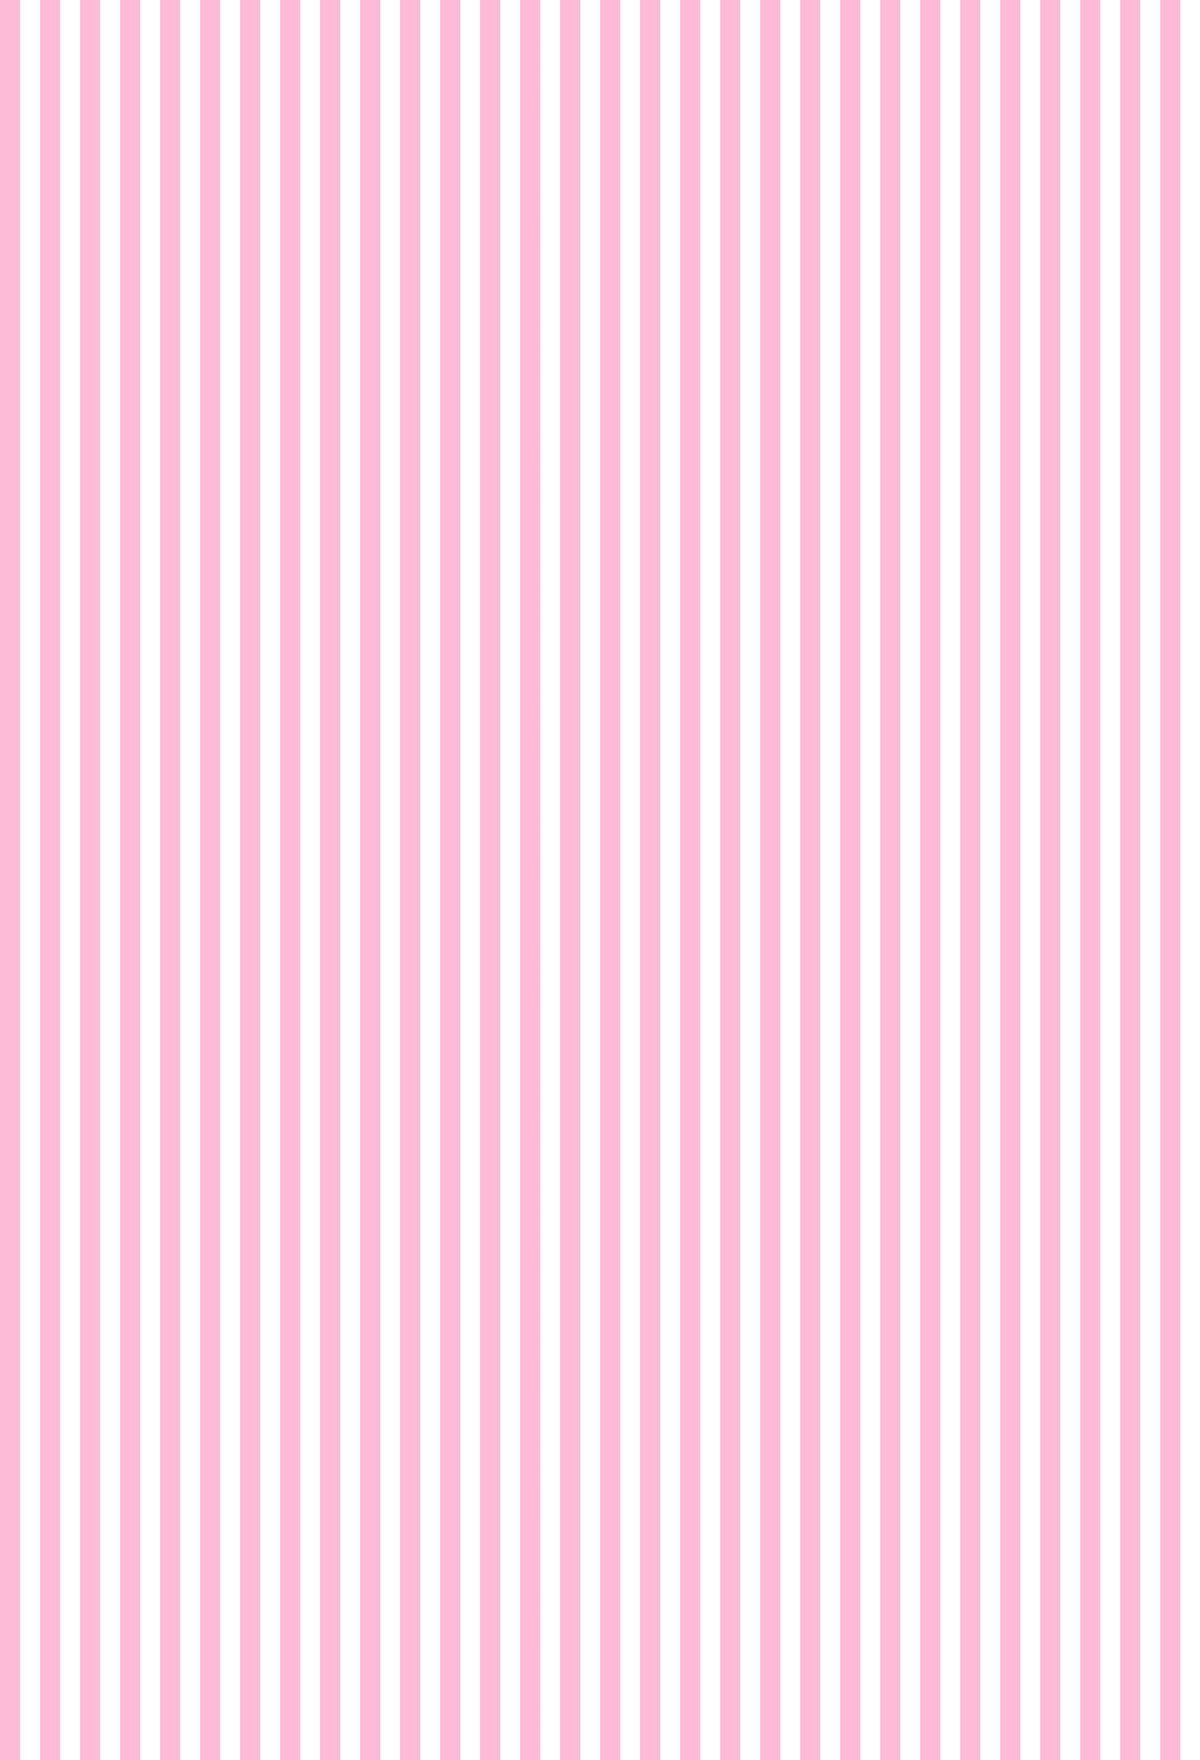 Premium Vector  Seamless pattern with vertical pink and beige stripes  abstract wallpaper background